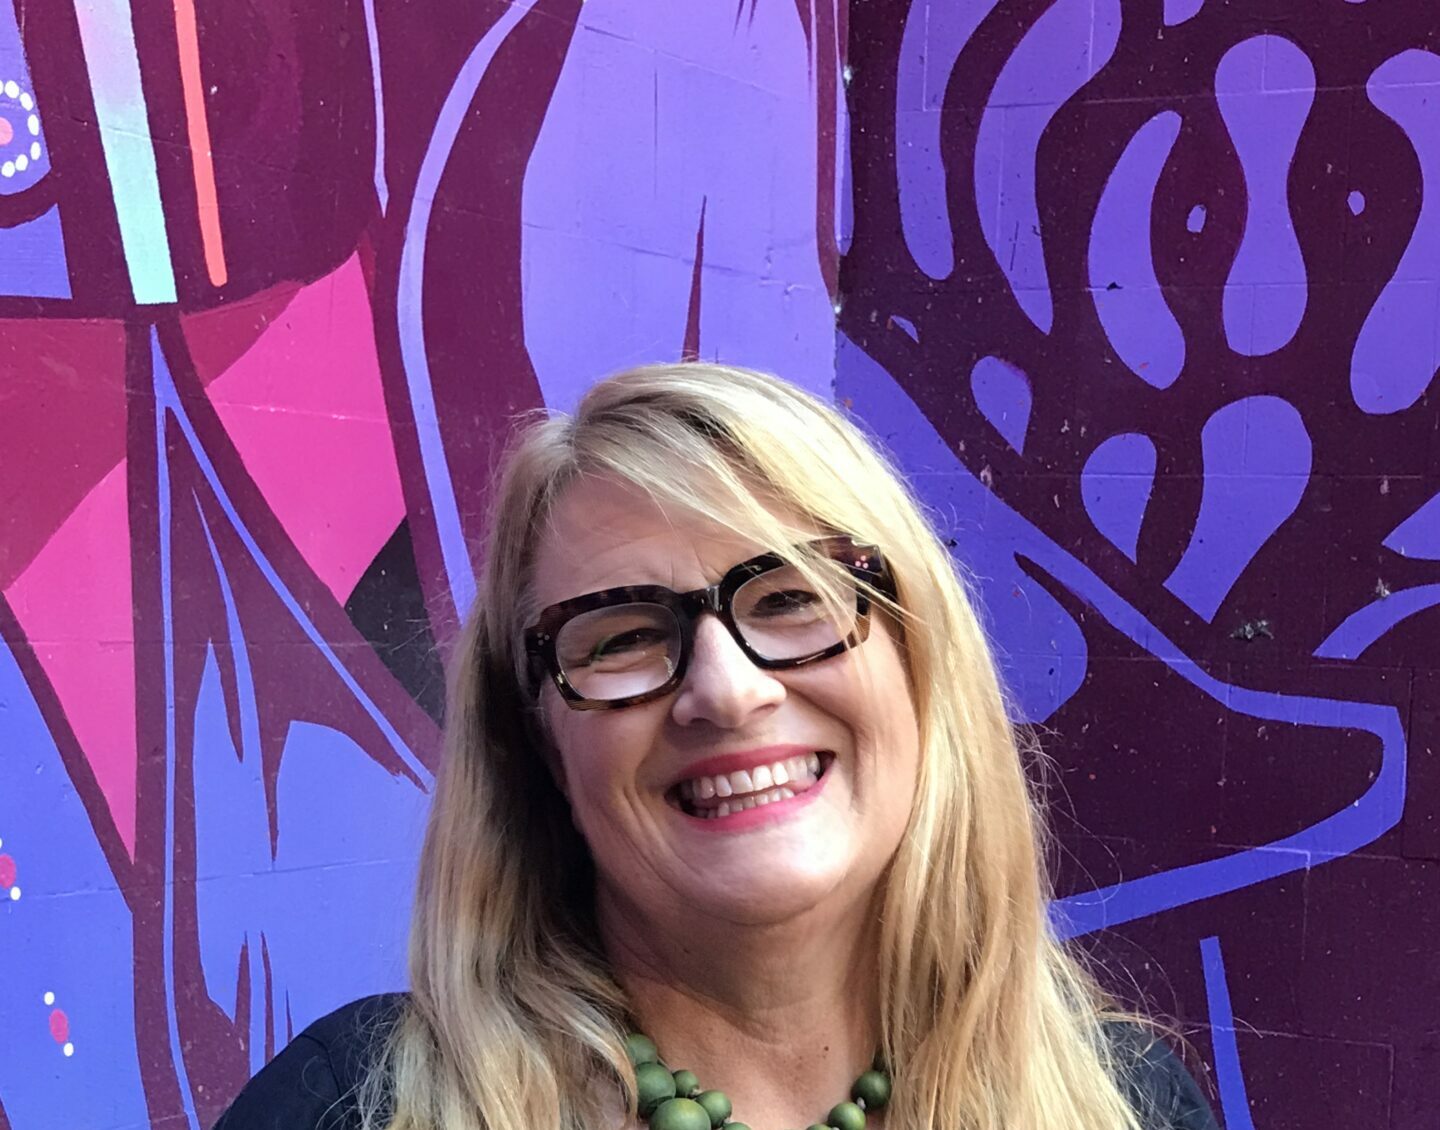 A middle-aged blonde woman with thick dark-rimmed glasses stands smiling in front of a blue and purple artwork